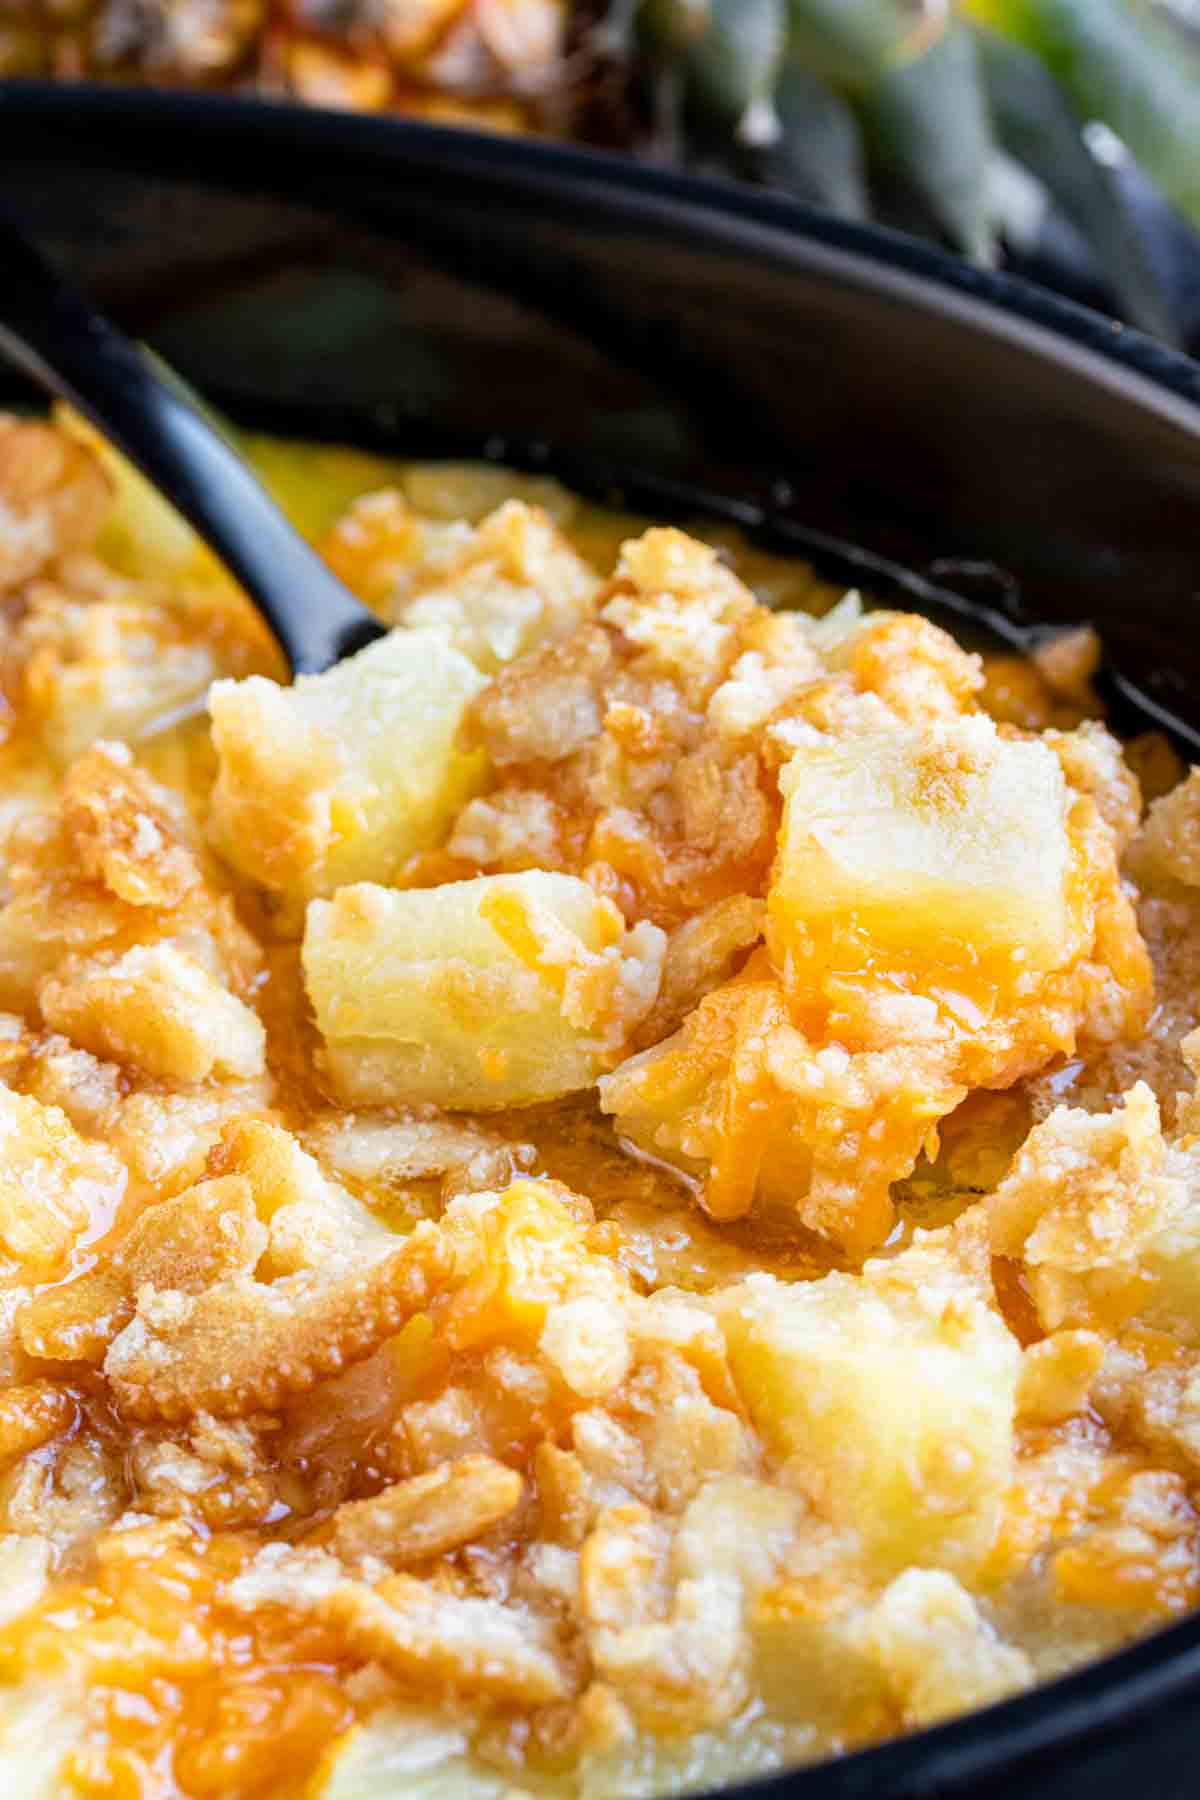 A bowl of cheesy pineapple casserole with a spoon.